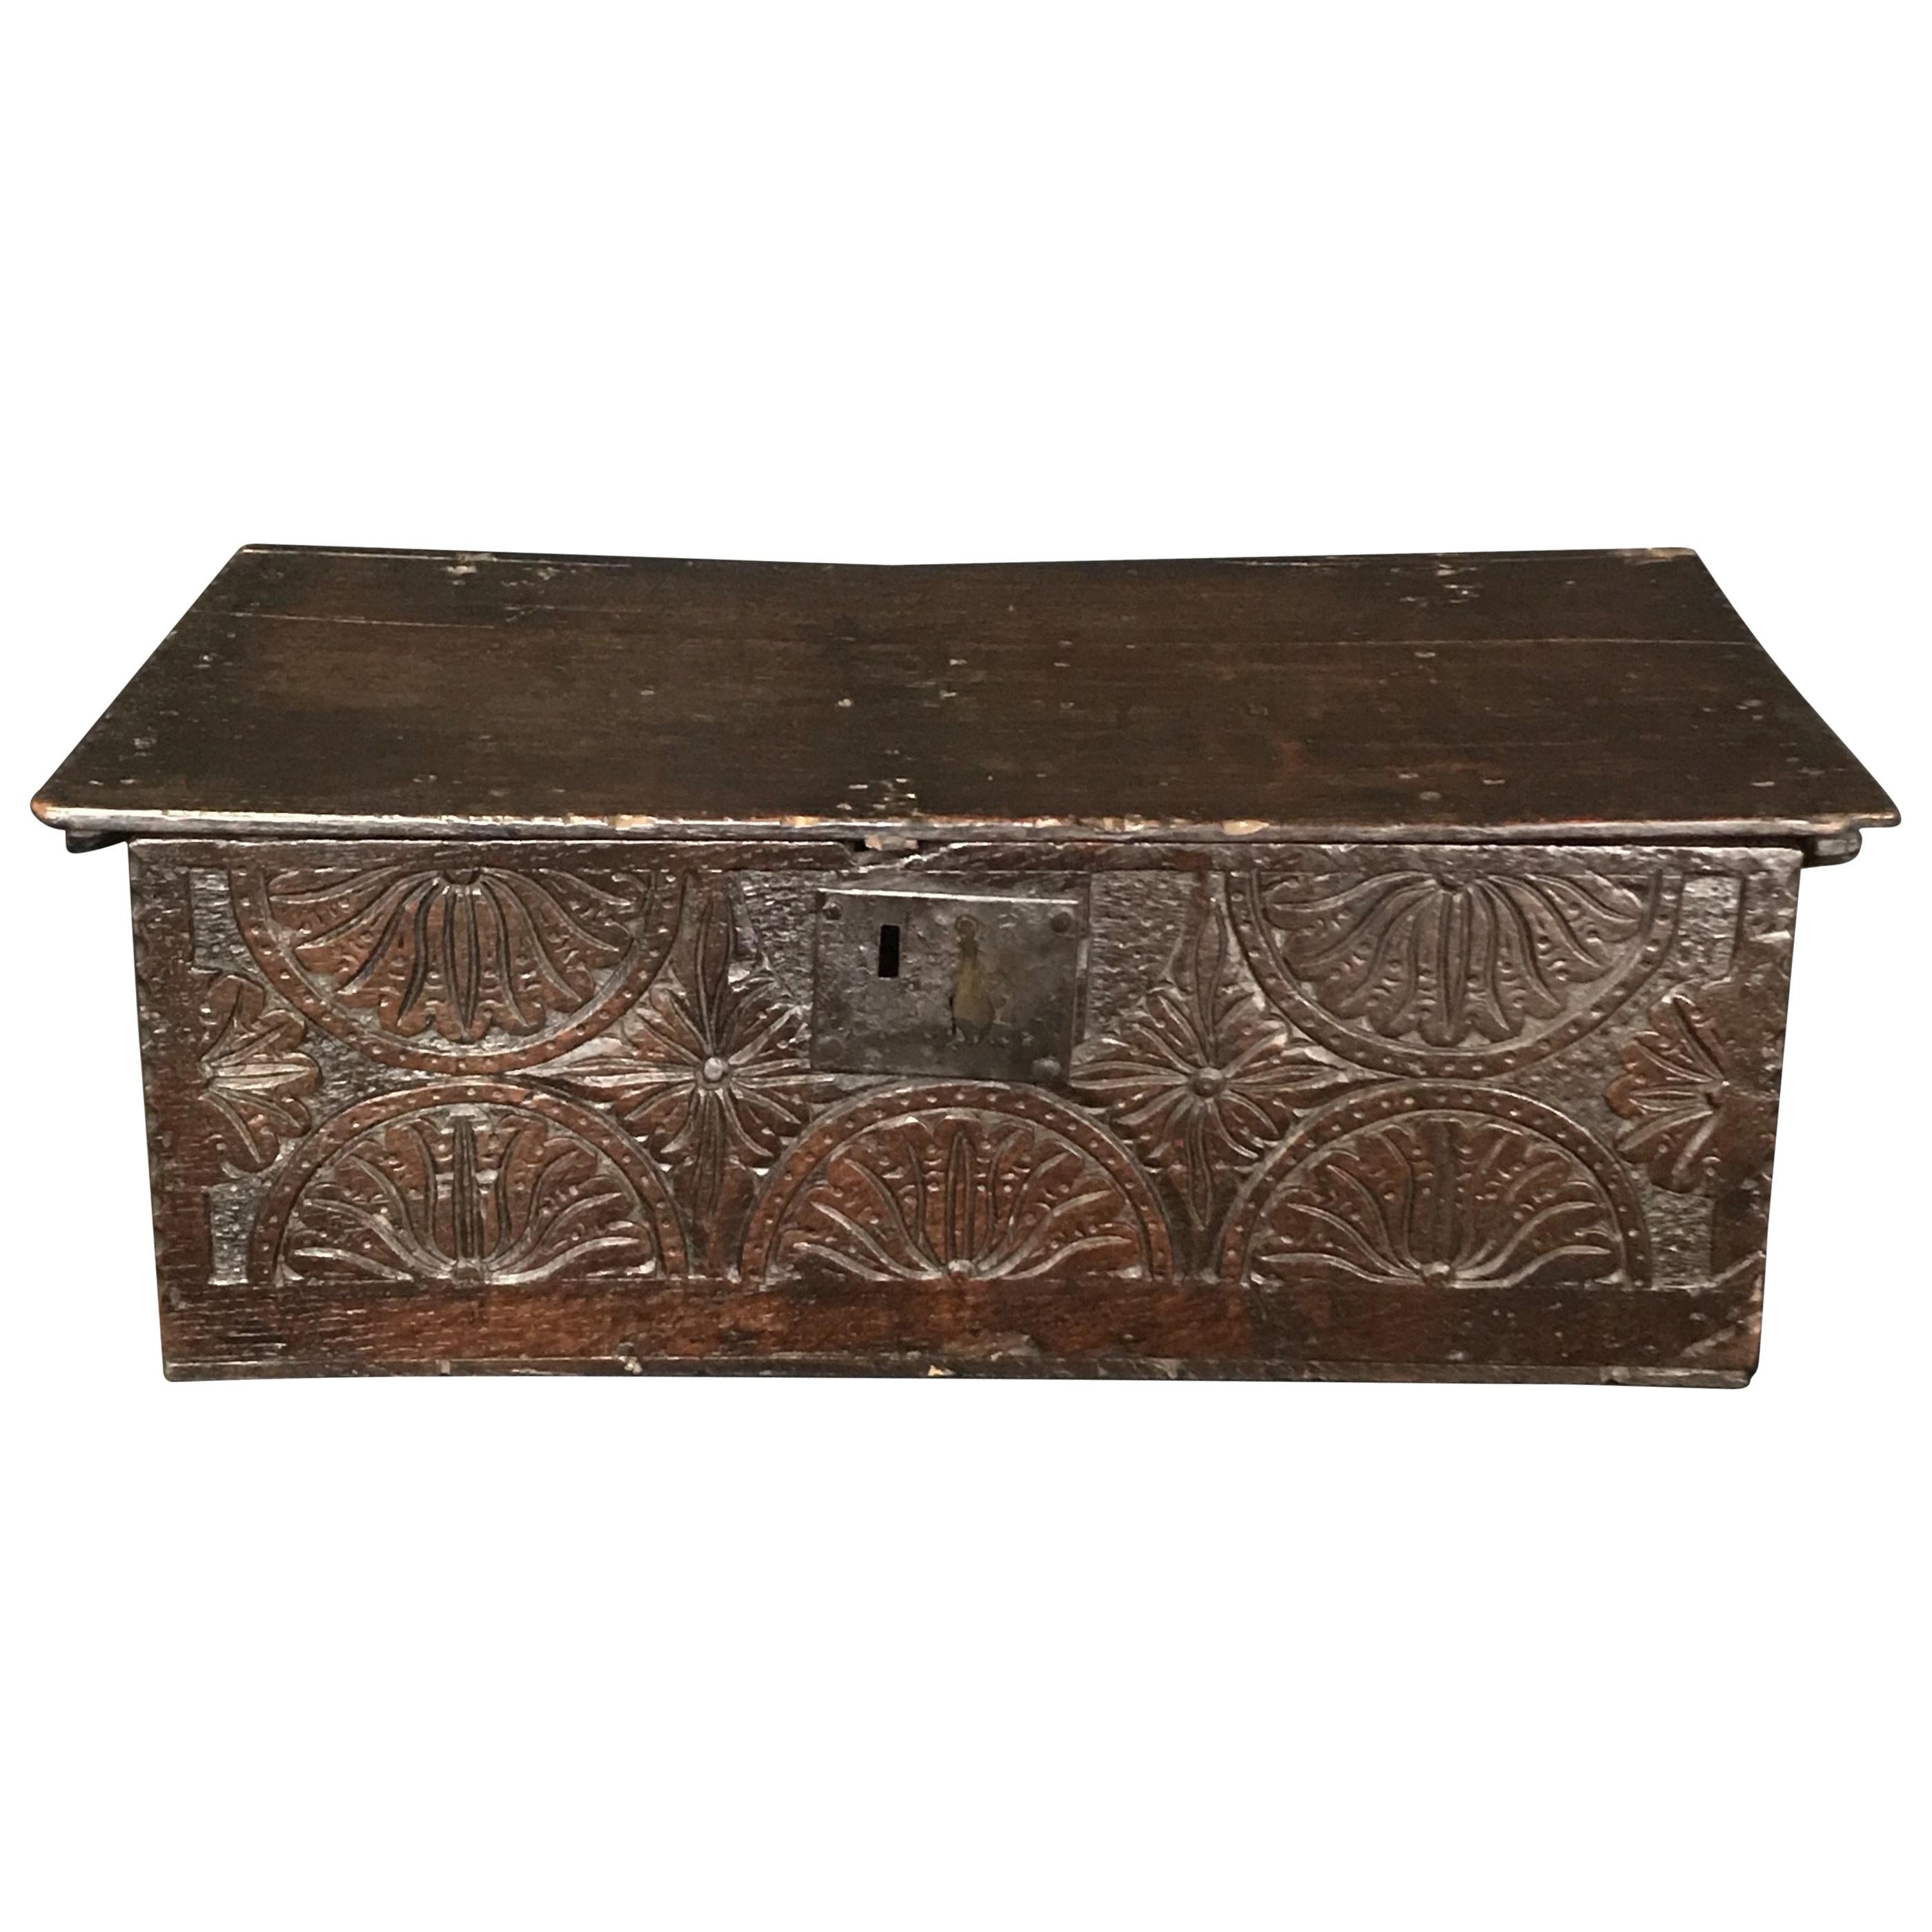 Astounding Ancient British 17th Century Bible Box For Sale